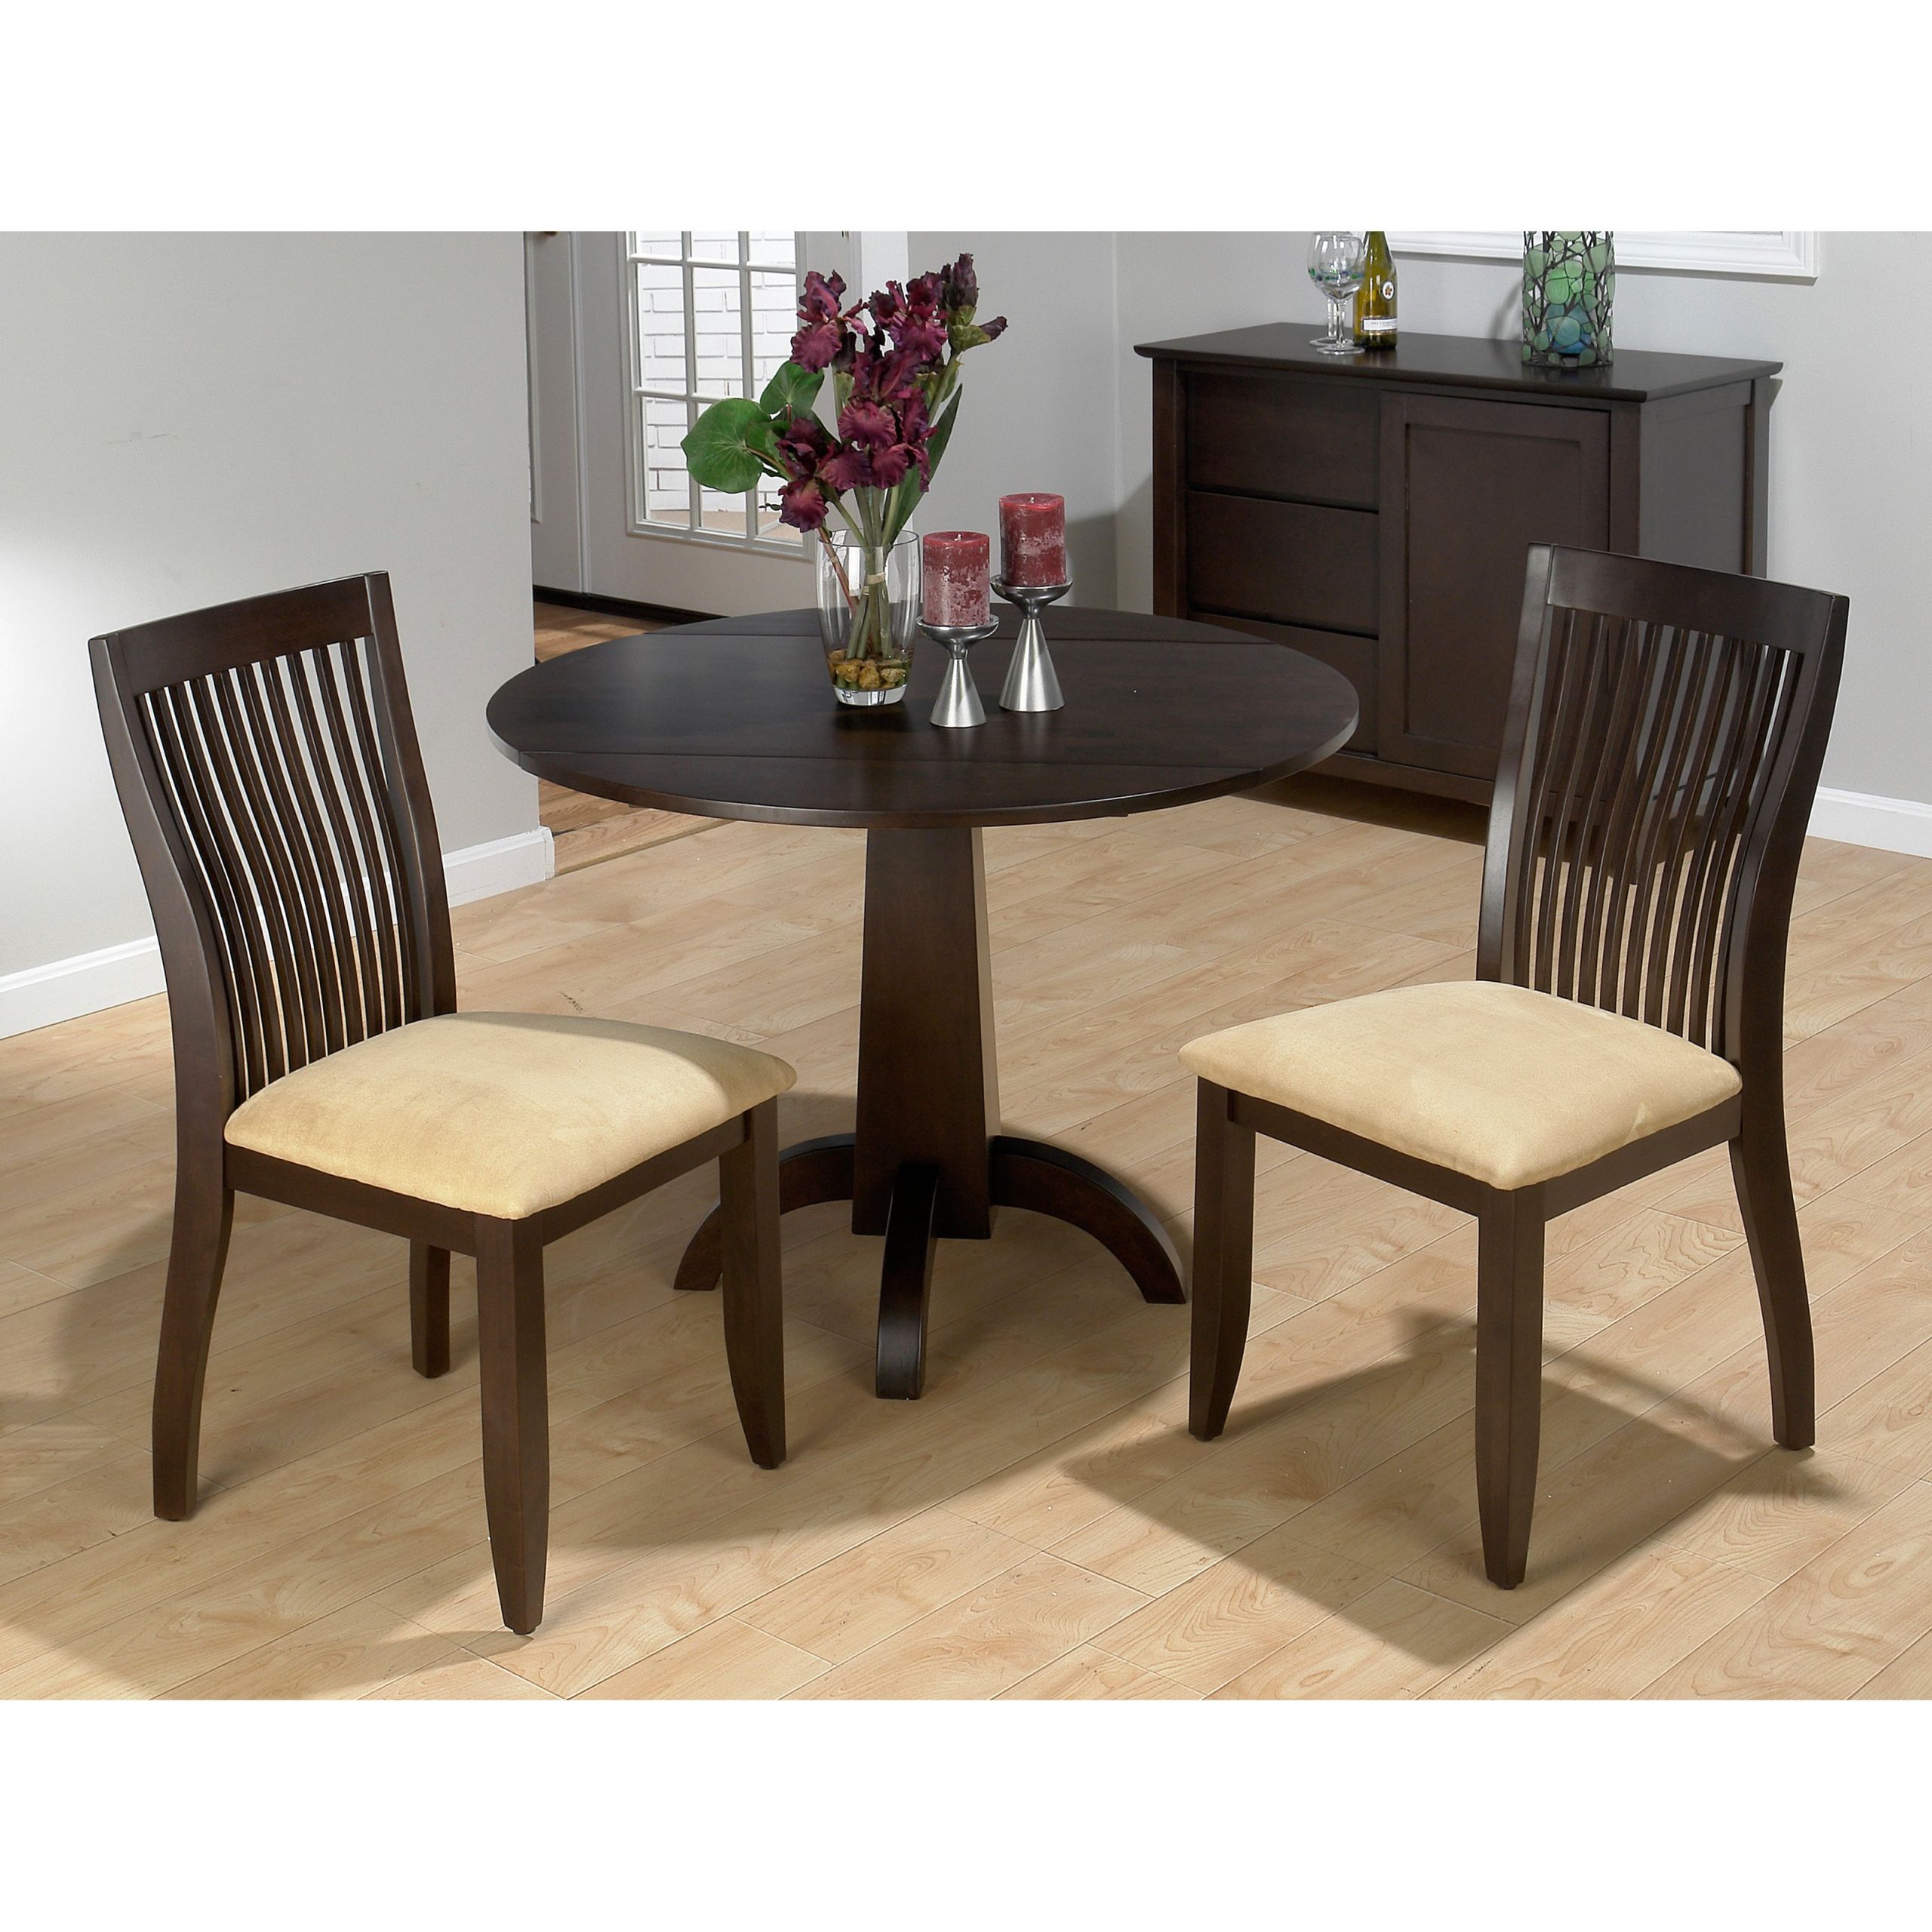 Small Bistro Tables For Kitchen
 Small Bistro Table Set For Kitchen Round And Chairs Modern